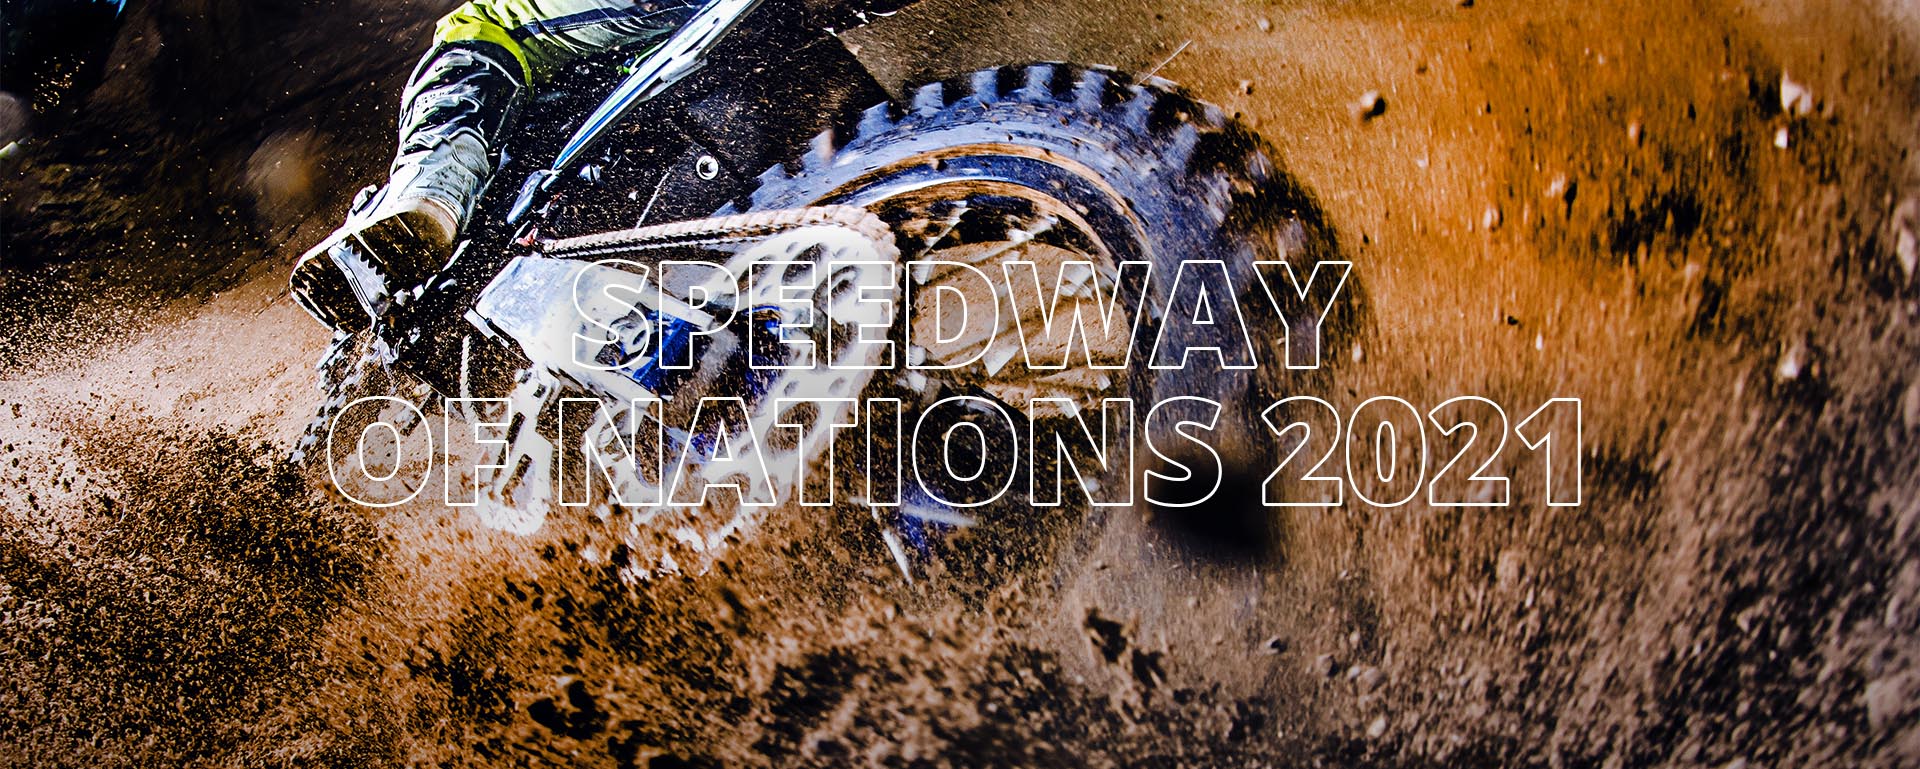 Speedway of Nations 2021